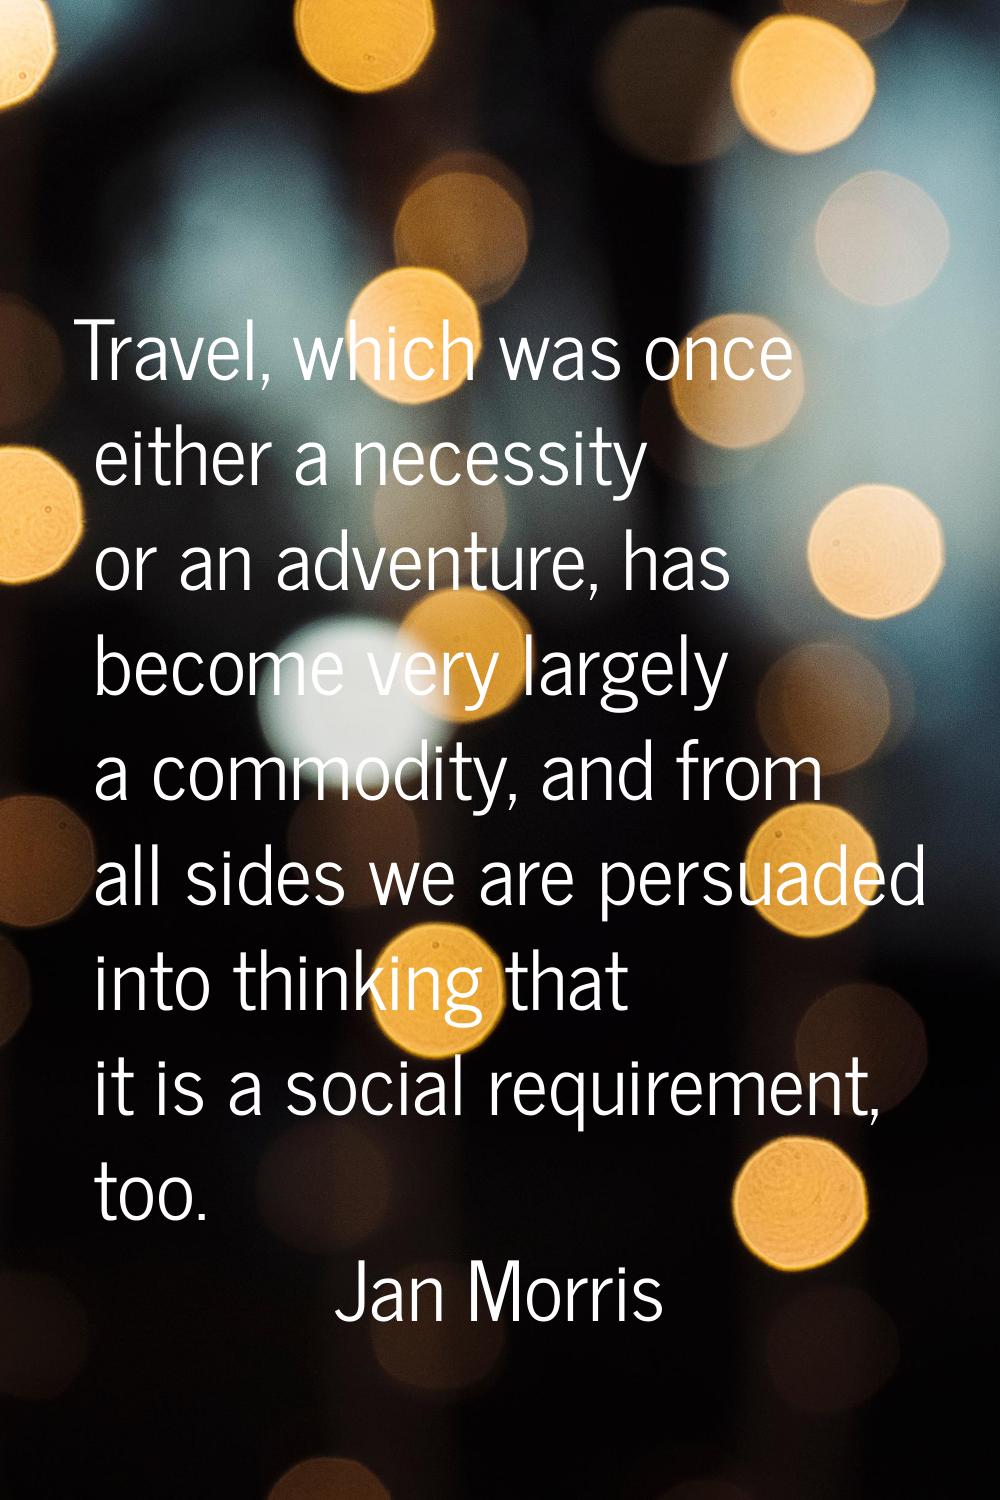 Travel, which was once either a necessity or an adventure, has become very largely a commodity, and